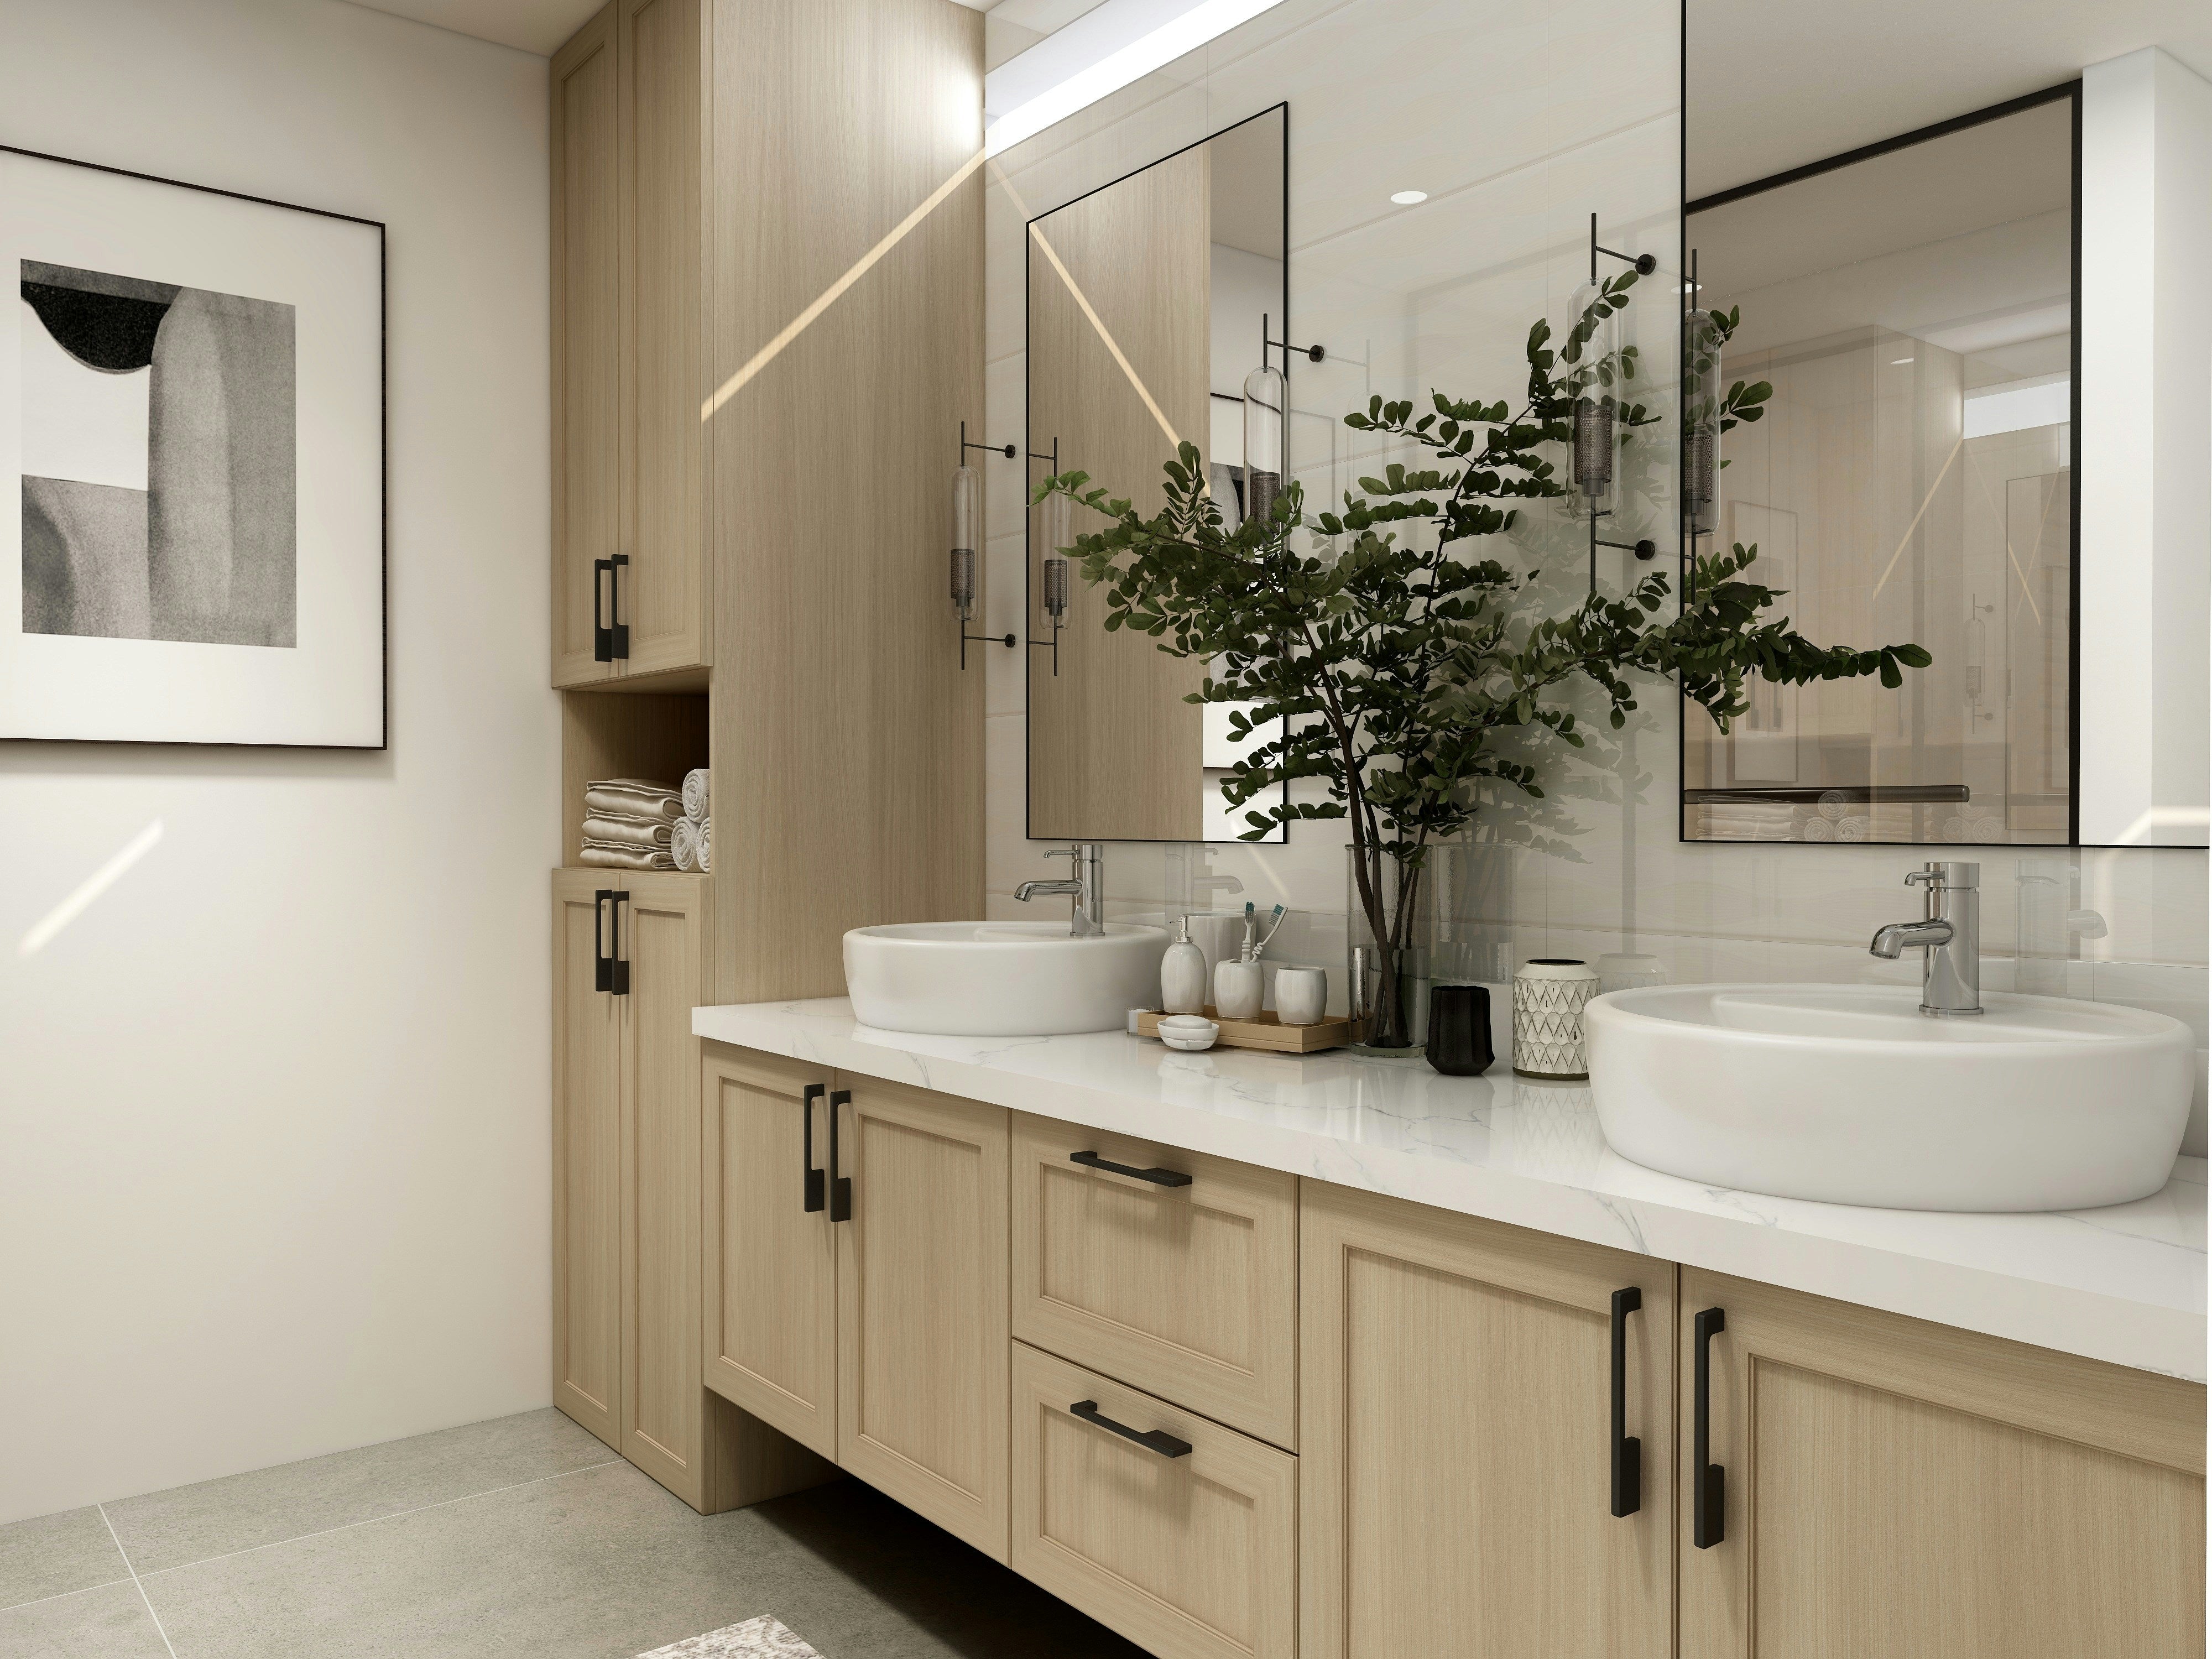 5 Plumbing Upgrades for Your Bathroom Remodel